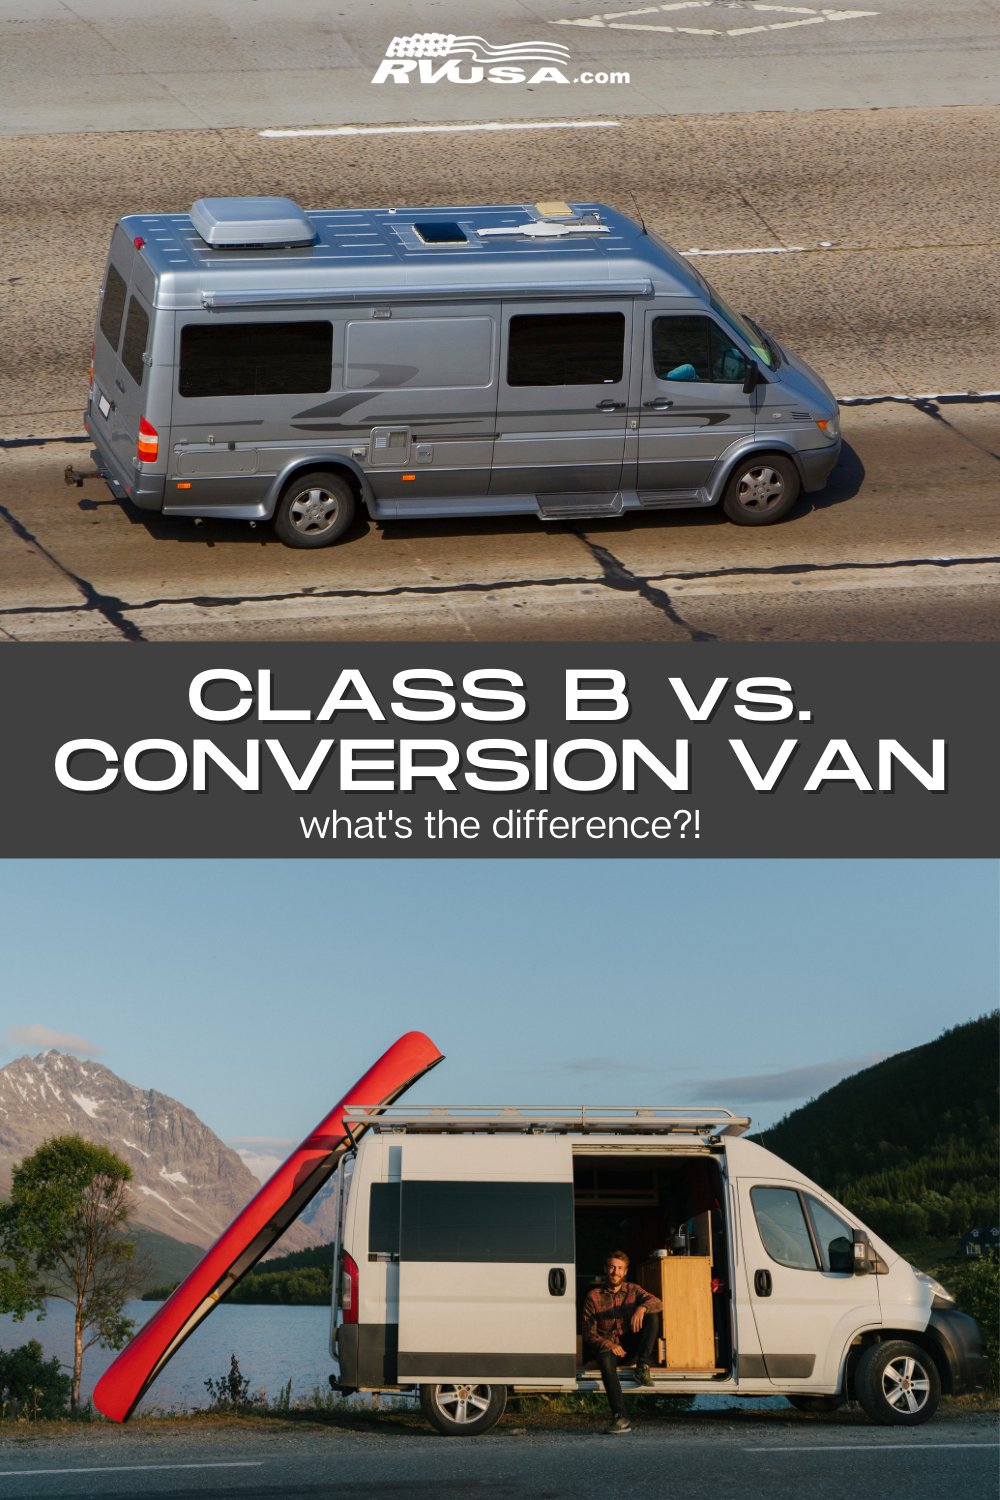 The top photo is a Class B van on the road, while the bottom photo is a conversion van by a lake. Text reads "Class B vs. Conversion van, what's the difference?"